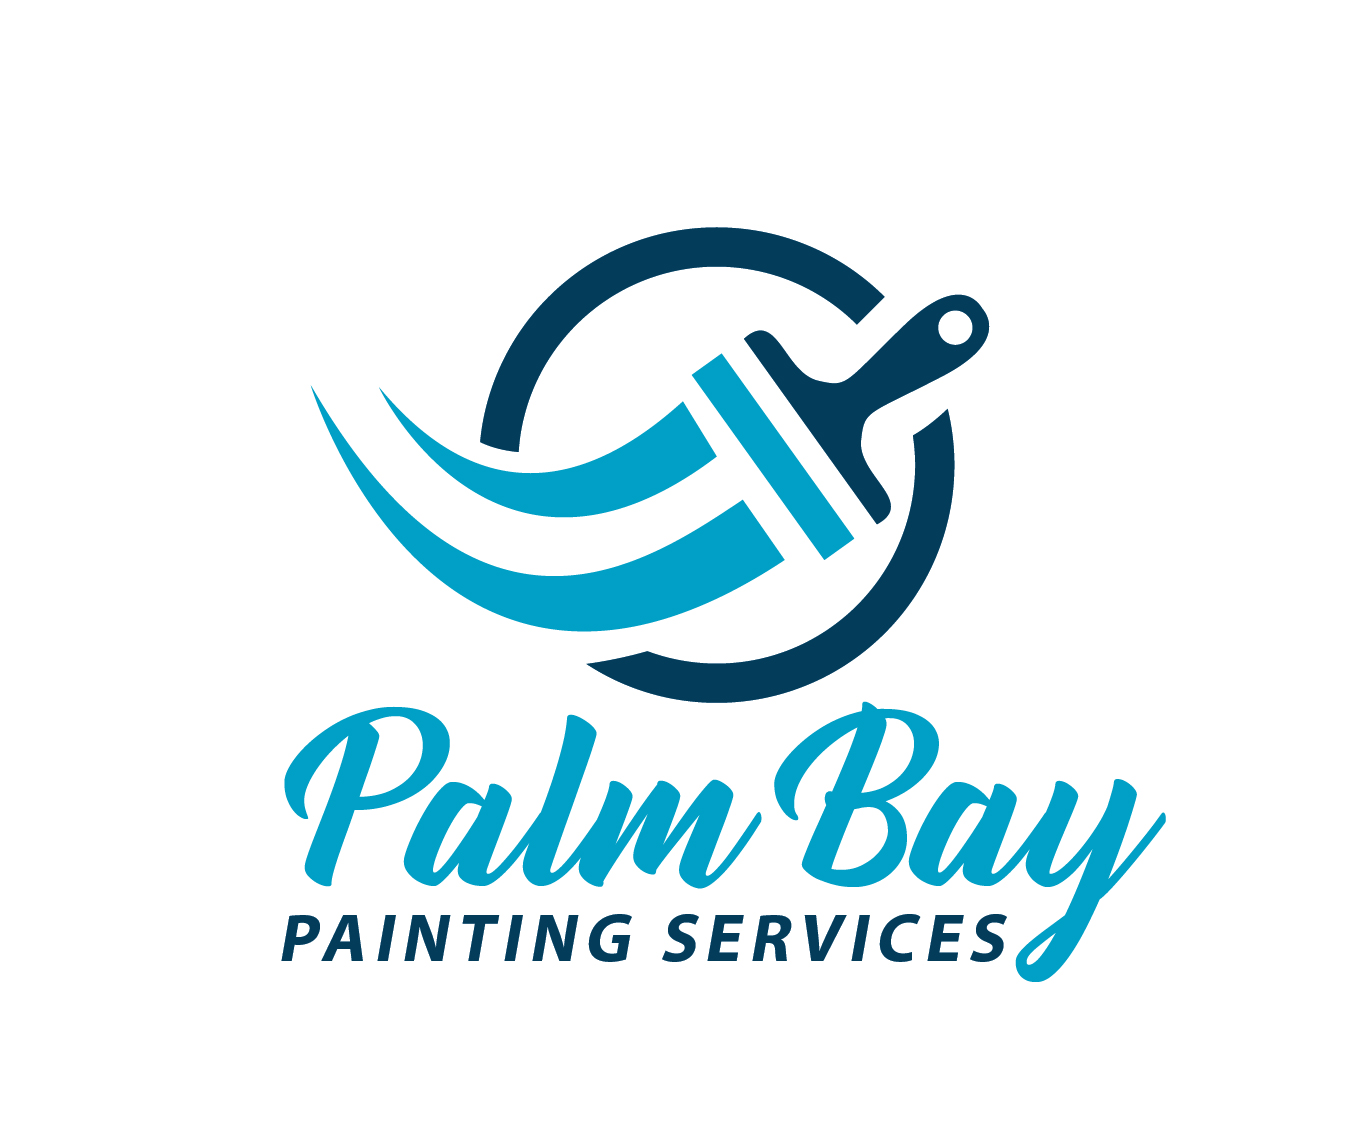 Palm Bay Painting Services's Logo